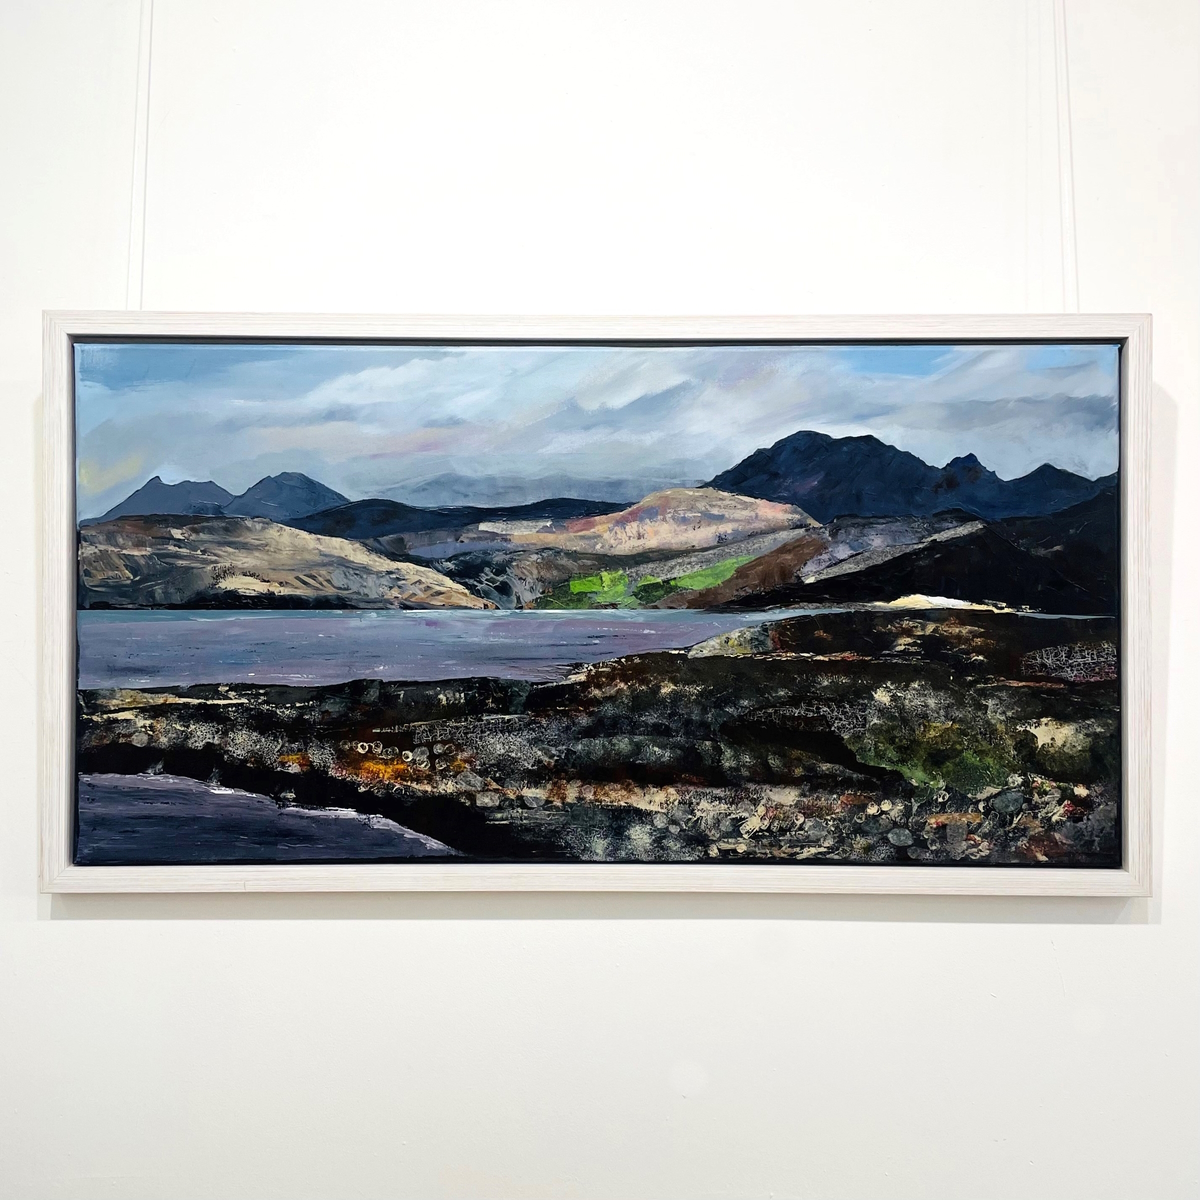 'The Cuillins from Ord' by artist Judith Appleby